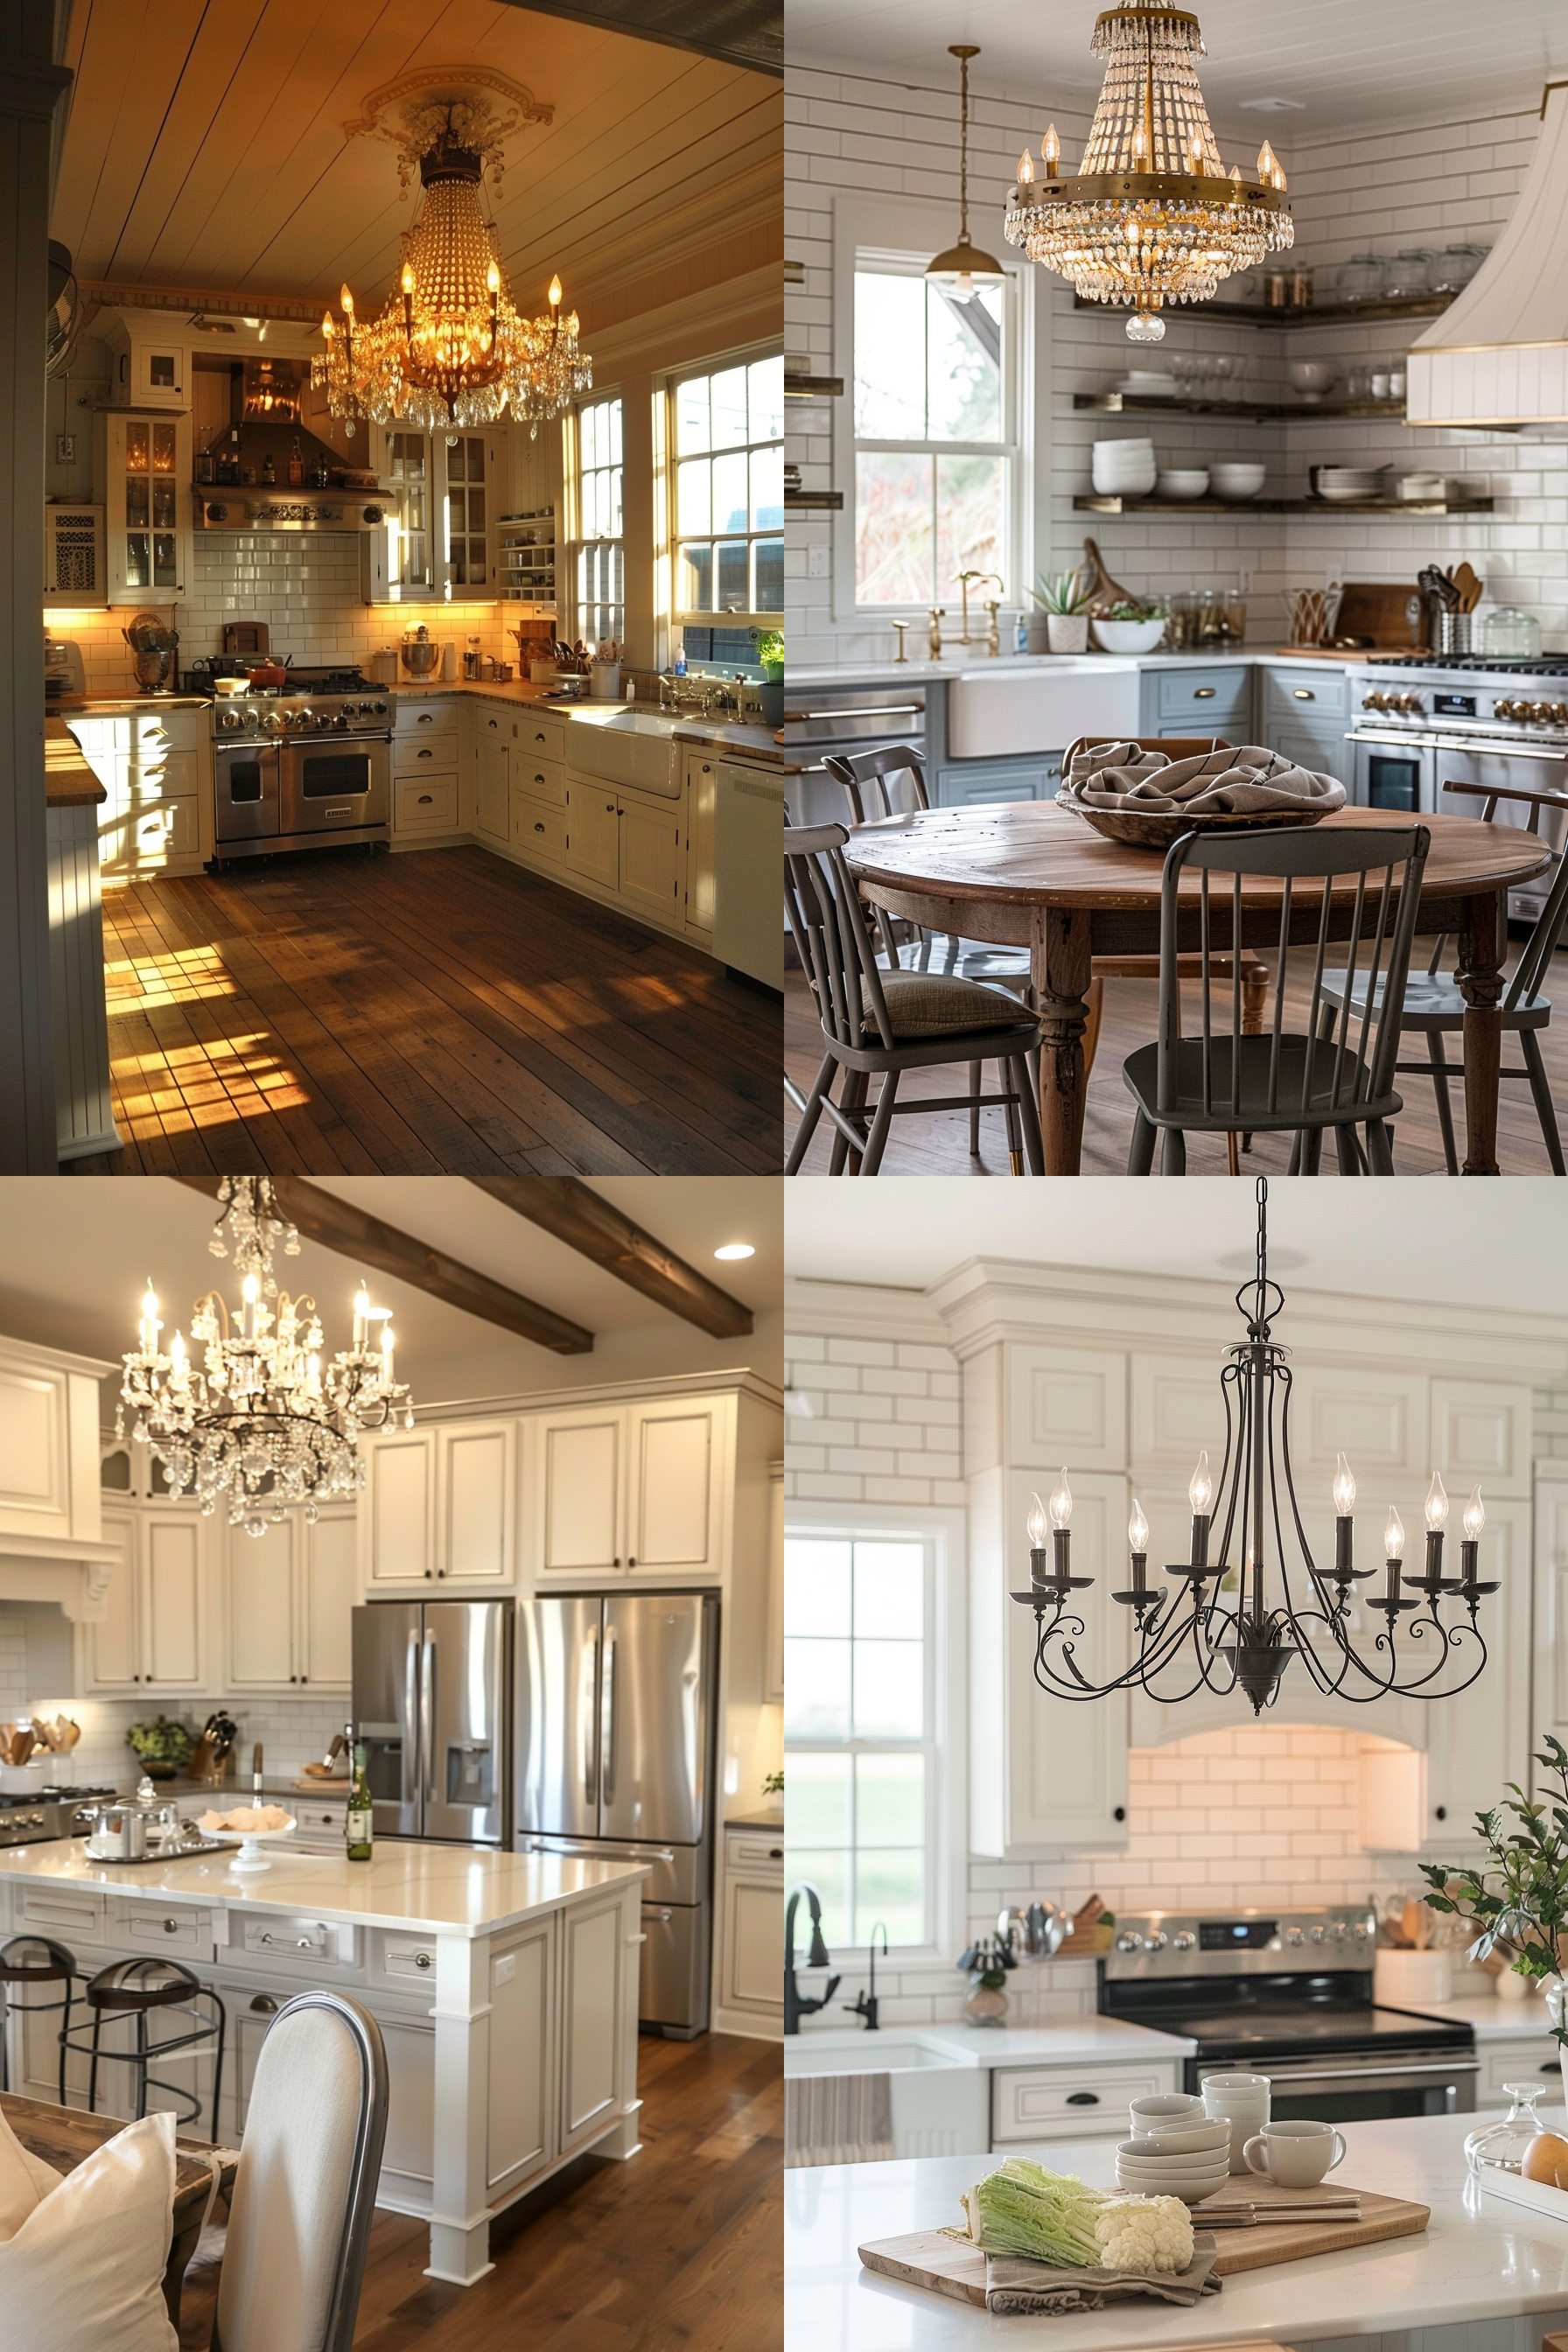 A collage of four elegant kitchens featuring chandeliers, white cabinetry, and wooden floors displaying warm, homey interiors.